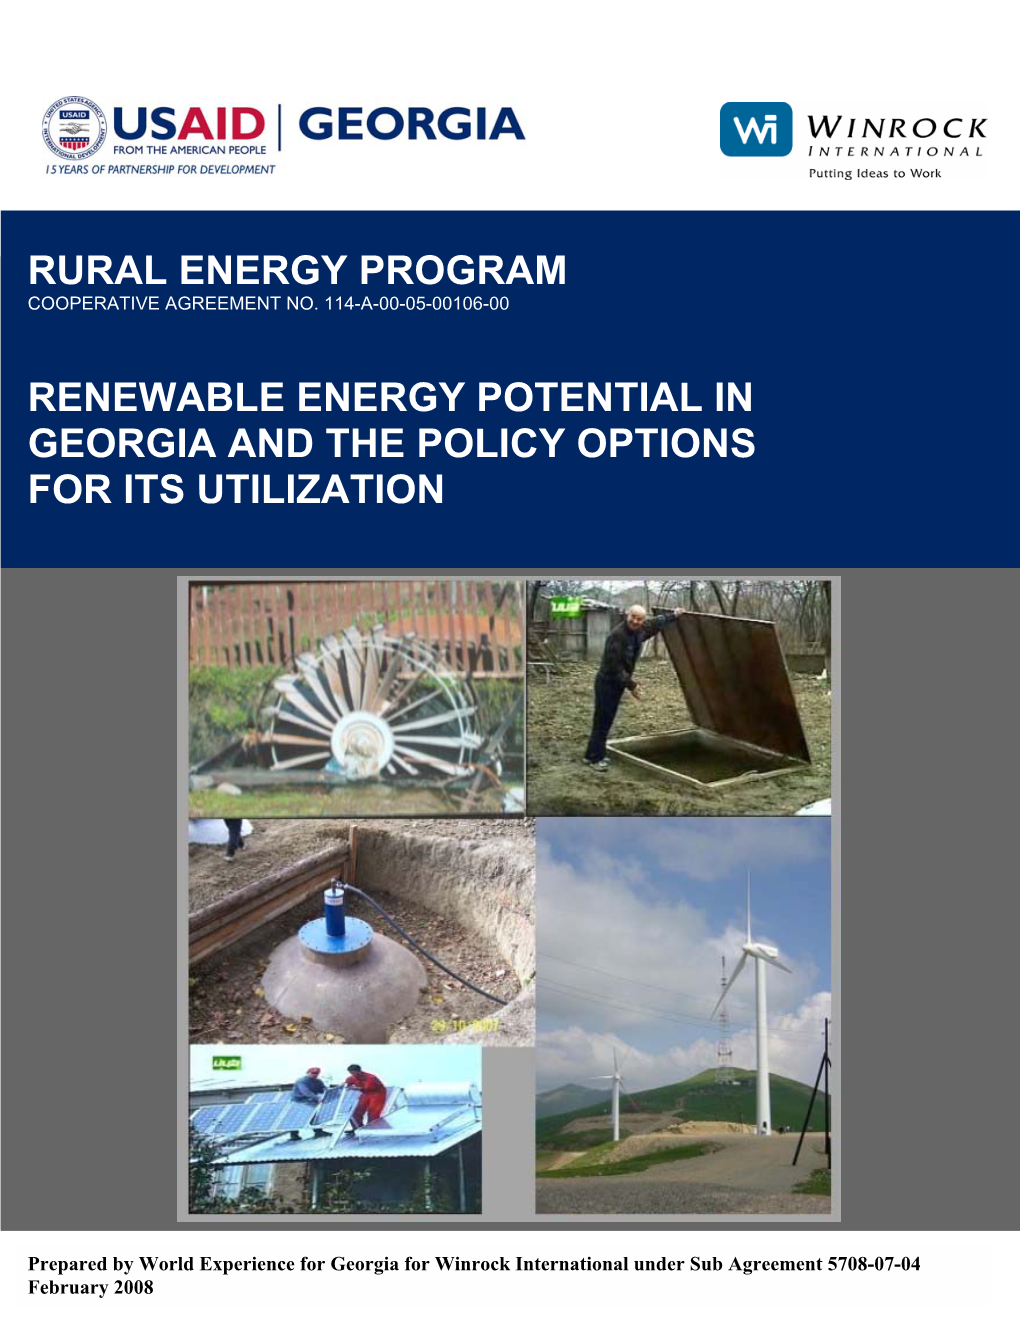 17 December 2012 Renewable Energy Potential in Georgia and The